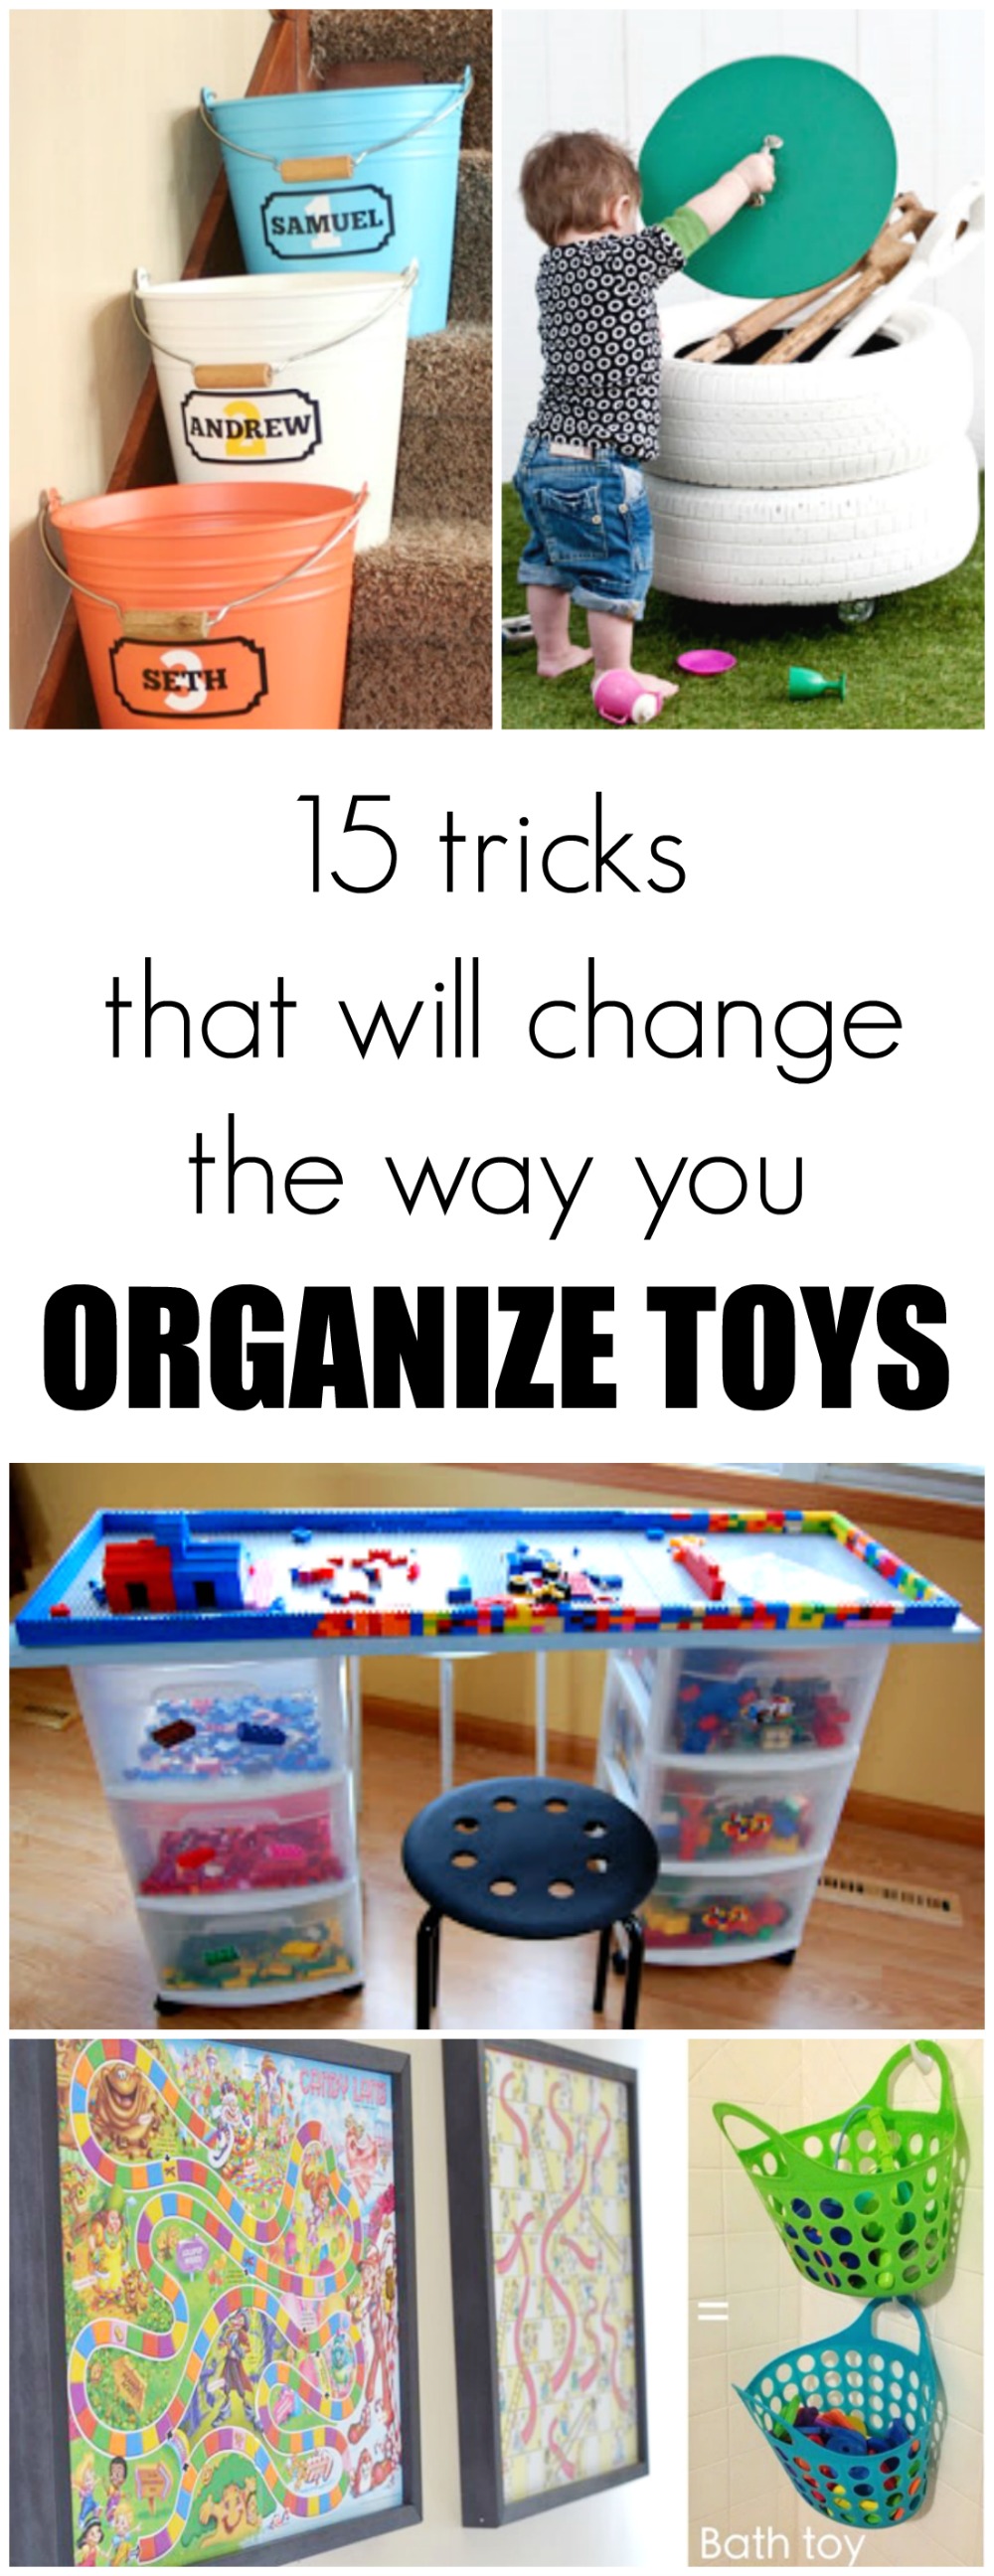 15 tricks that will change the way you organize toys! I love #10! Can't wait to try it!